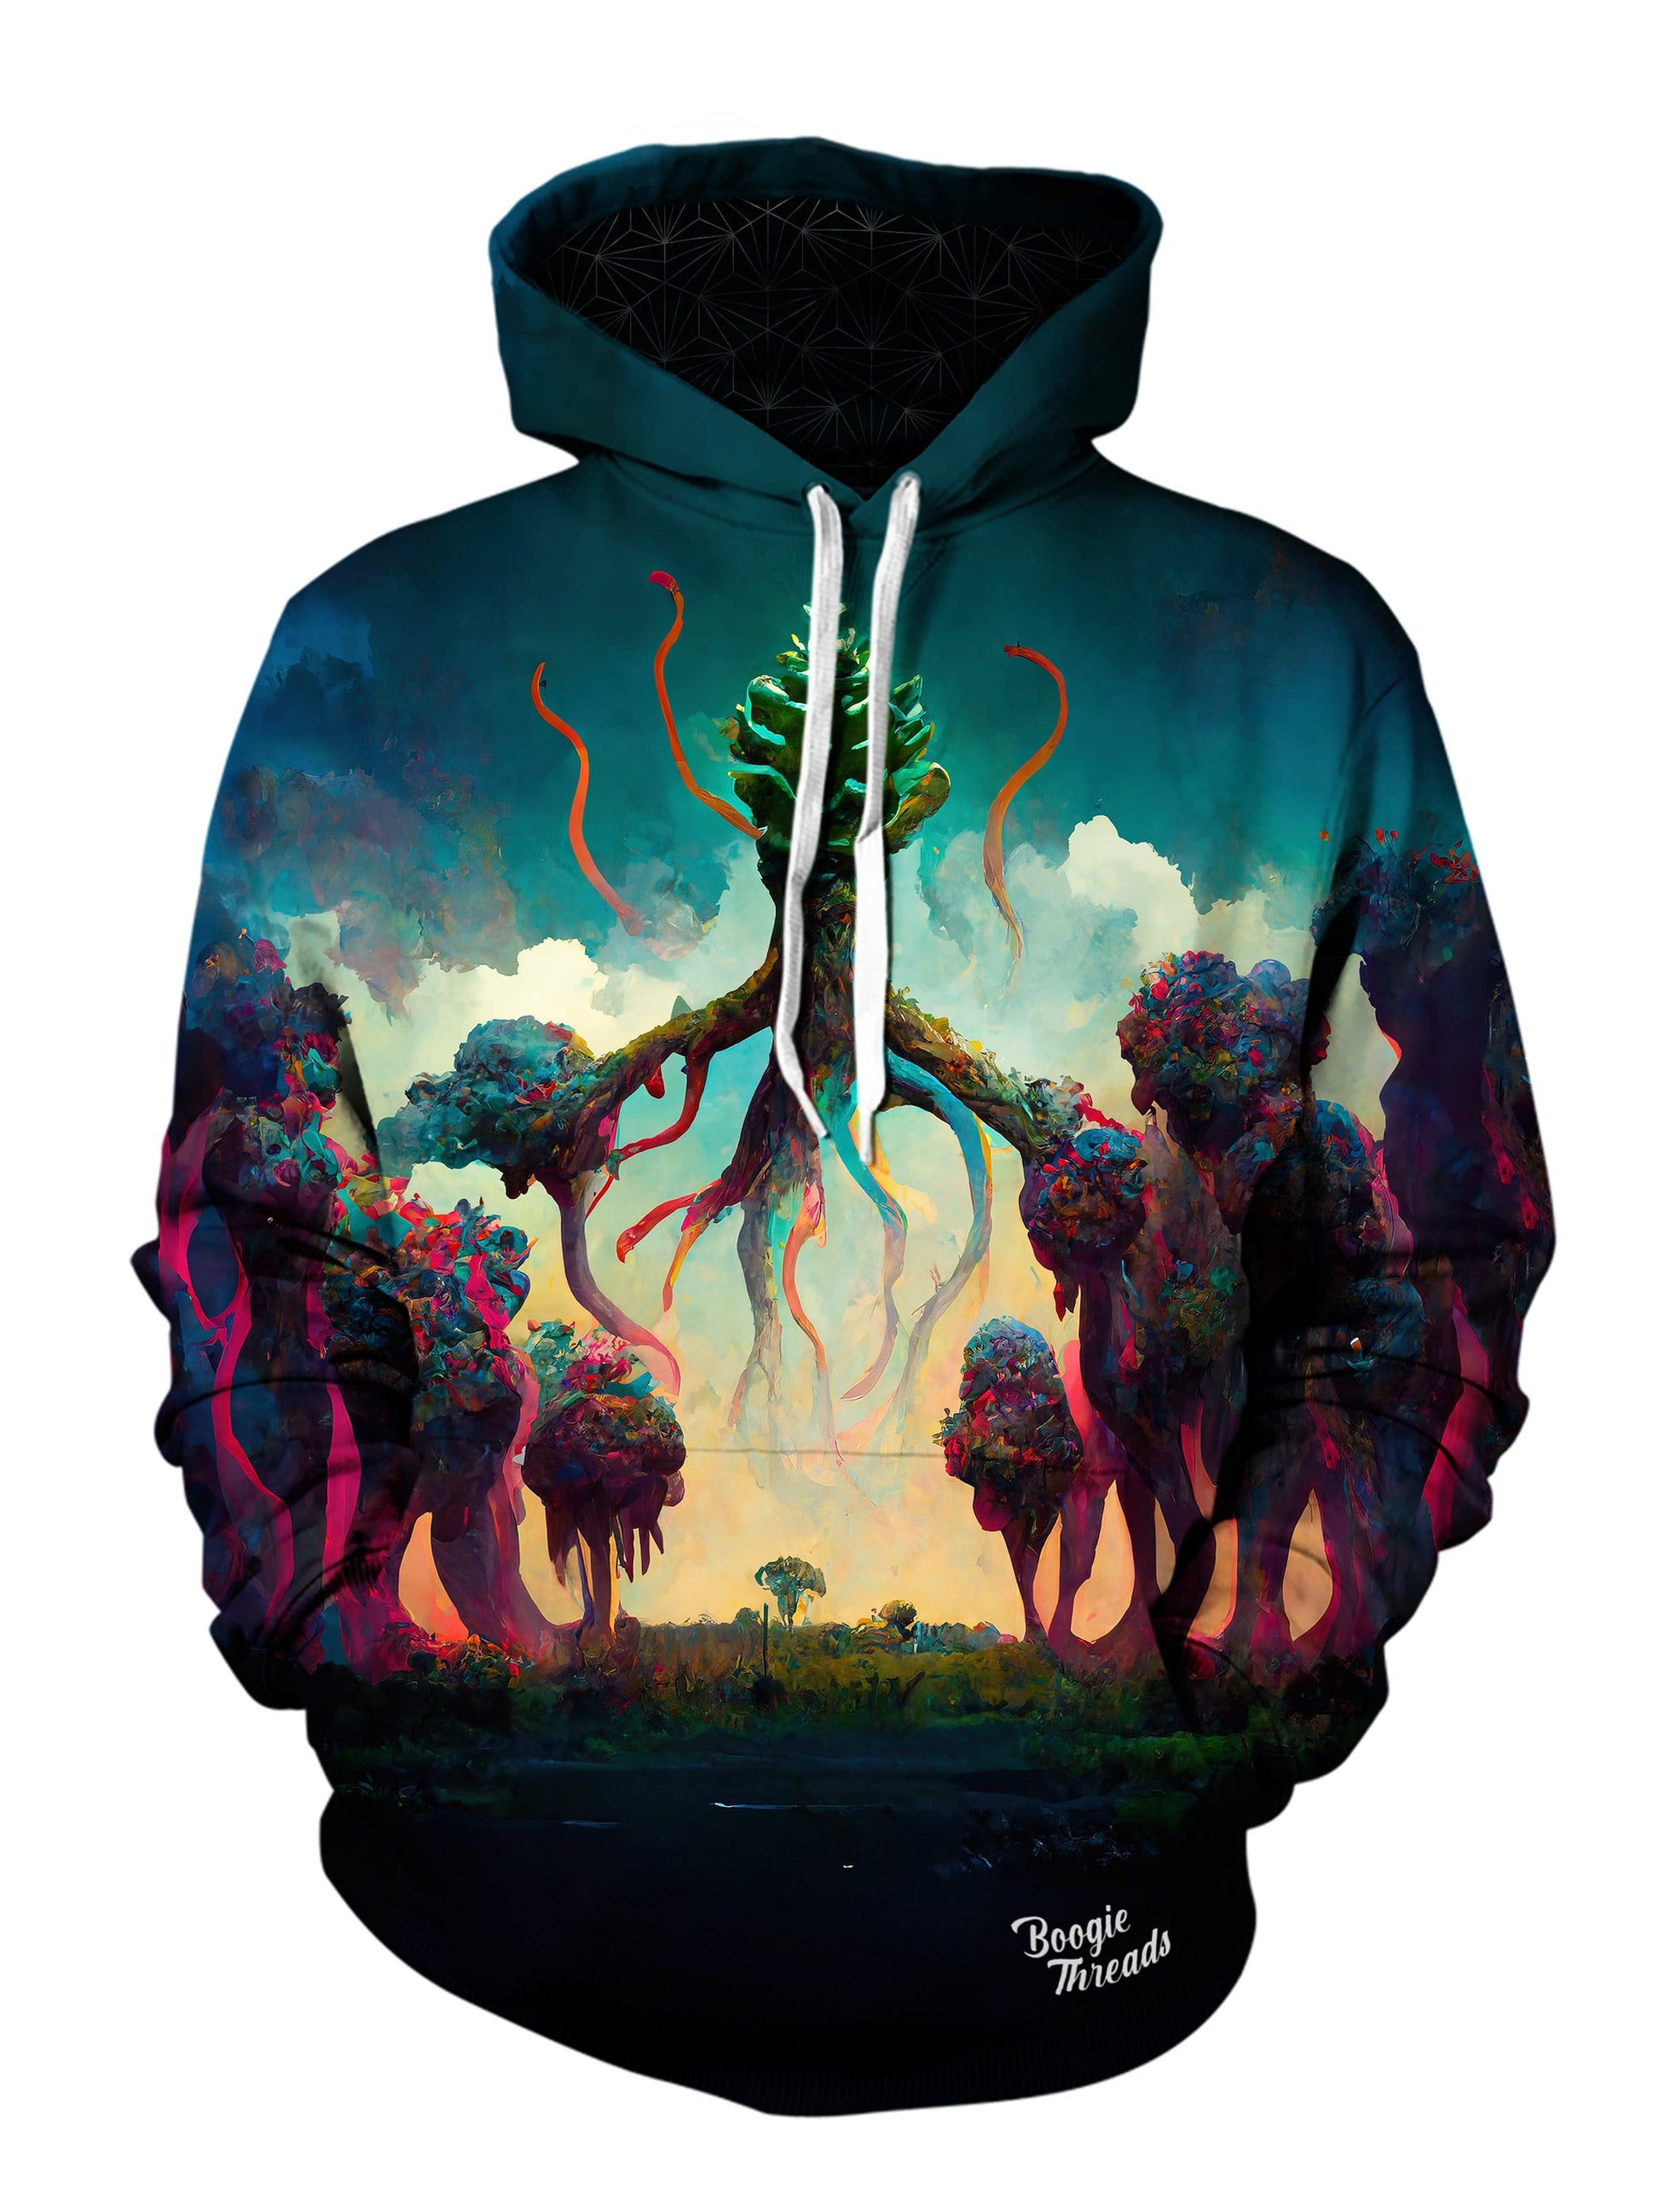 Glorious Destruction Unisex Pullover Hoodie - EDM Festival Clothing - Boogie Threads